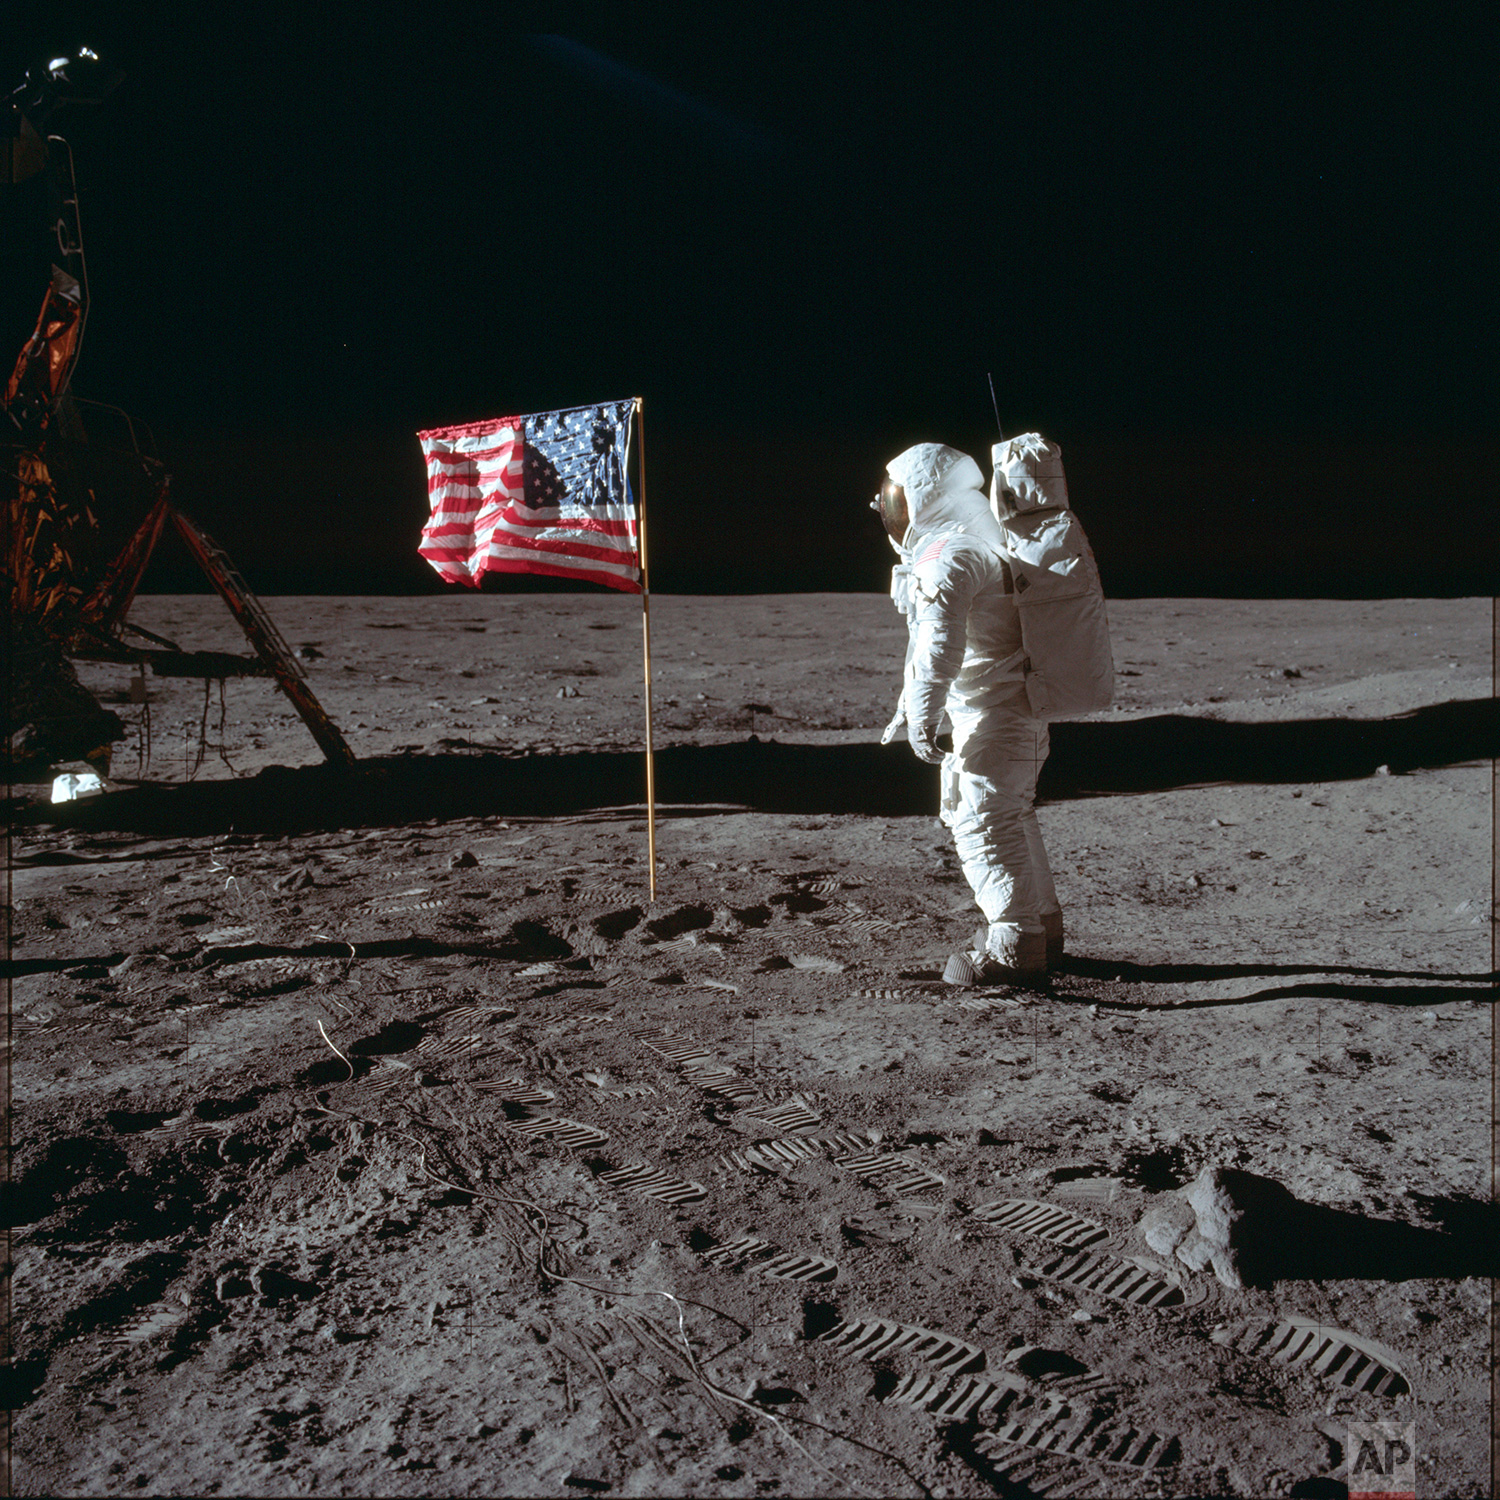  In this July 20, 1969 photo made available by NASA, astronaut Buzz Aldrin Jr. poses for a photograph beside the U.S. flag on the moon during the Apollo 11 mission. Aldrin and fellow astronaut Neil Armstrong were the first men to walk on the lunar su